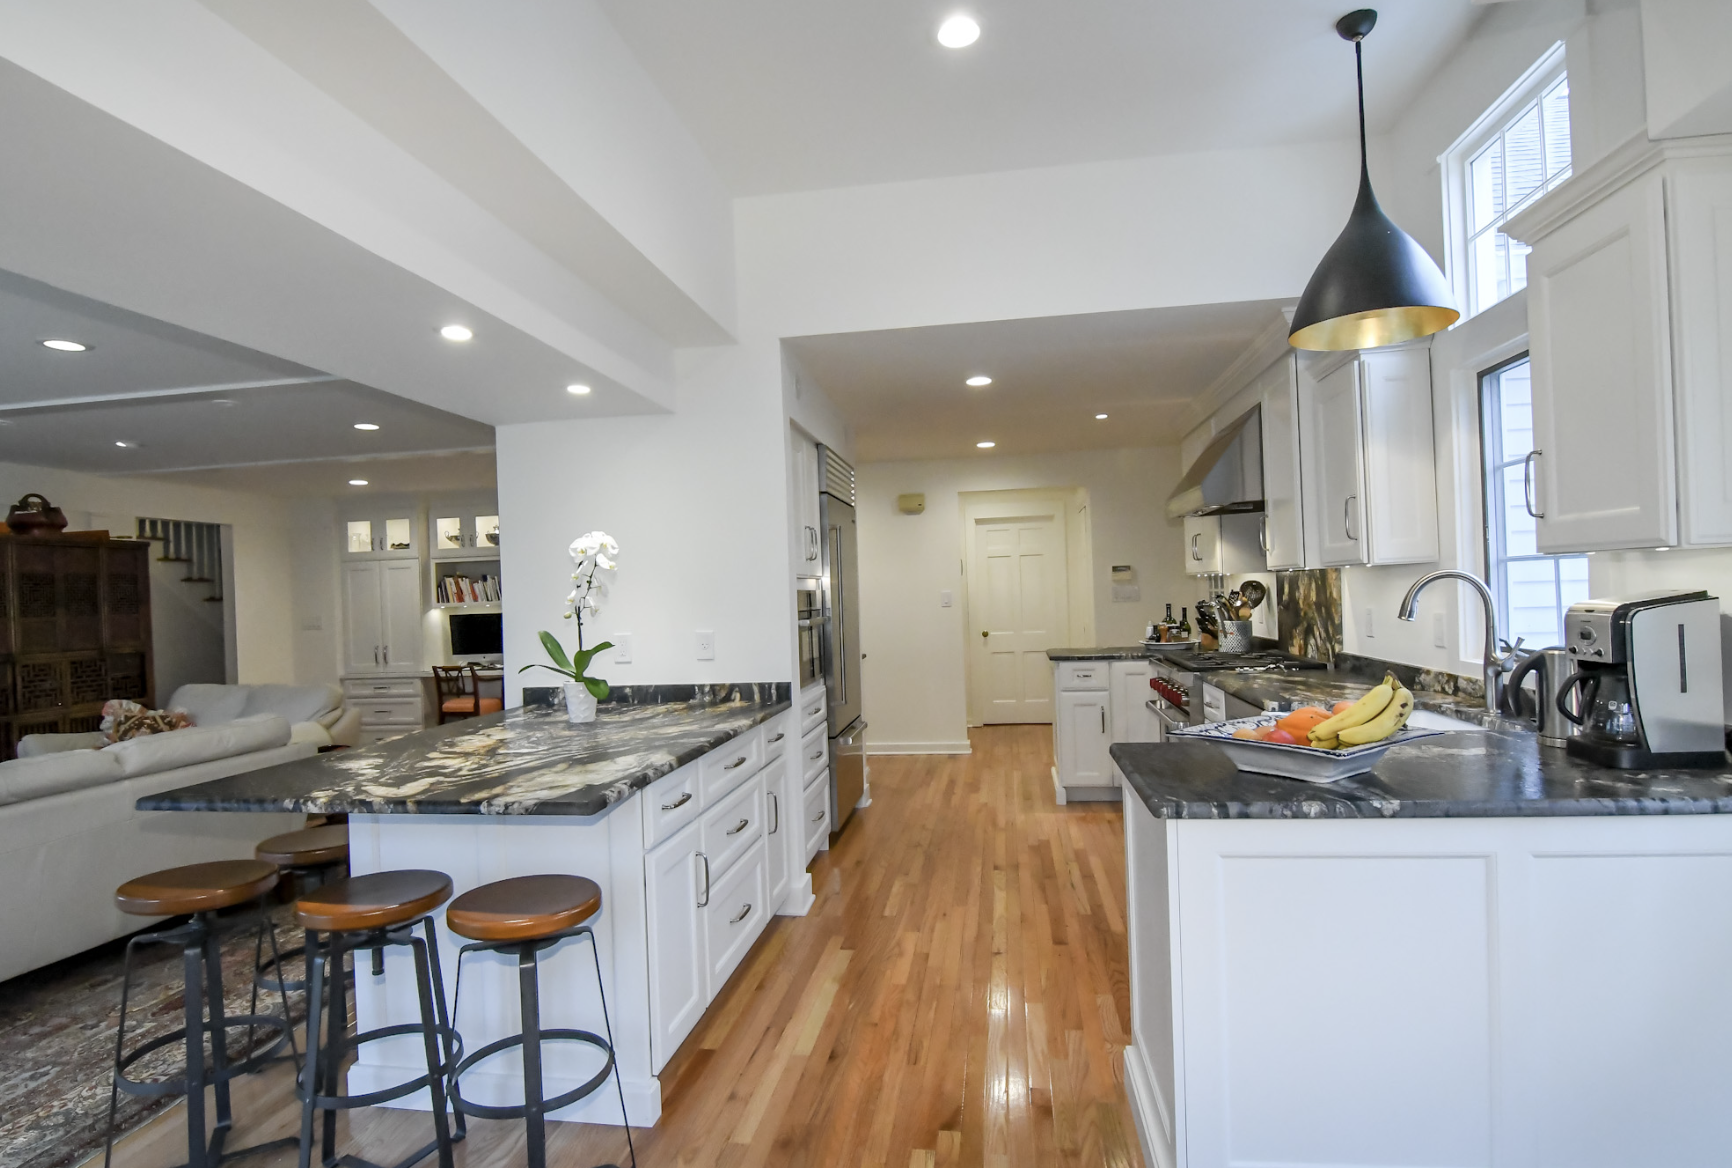 What Are the Benefits of an Open Concept Kitchen?